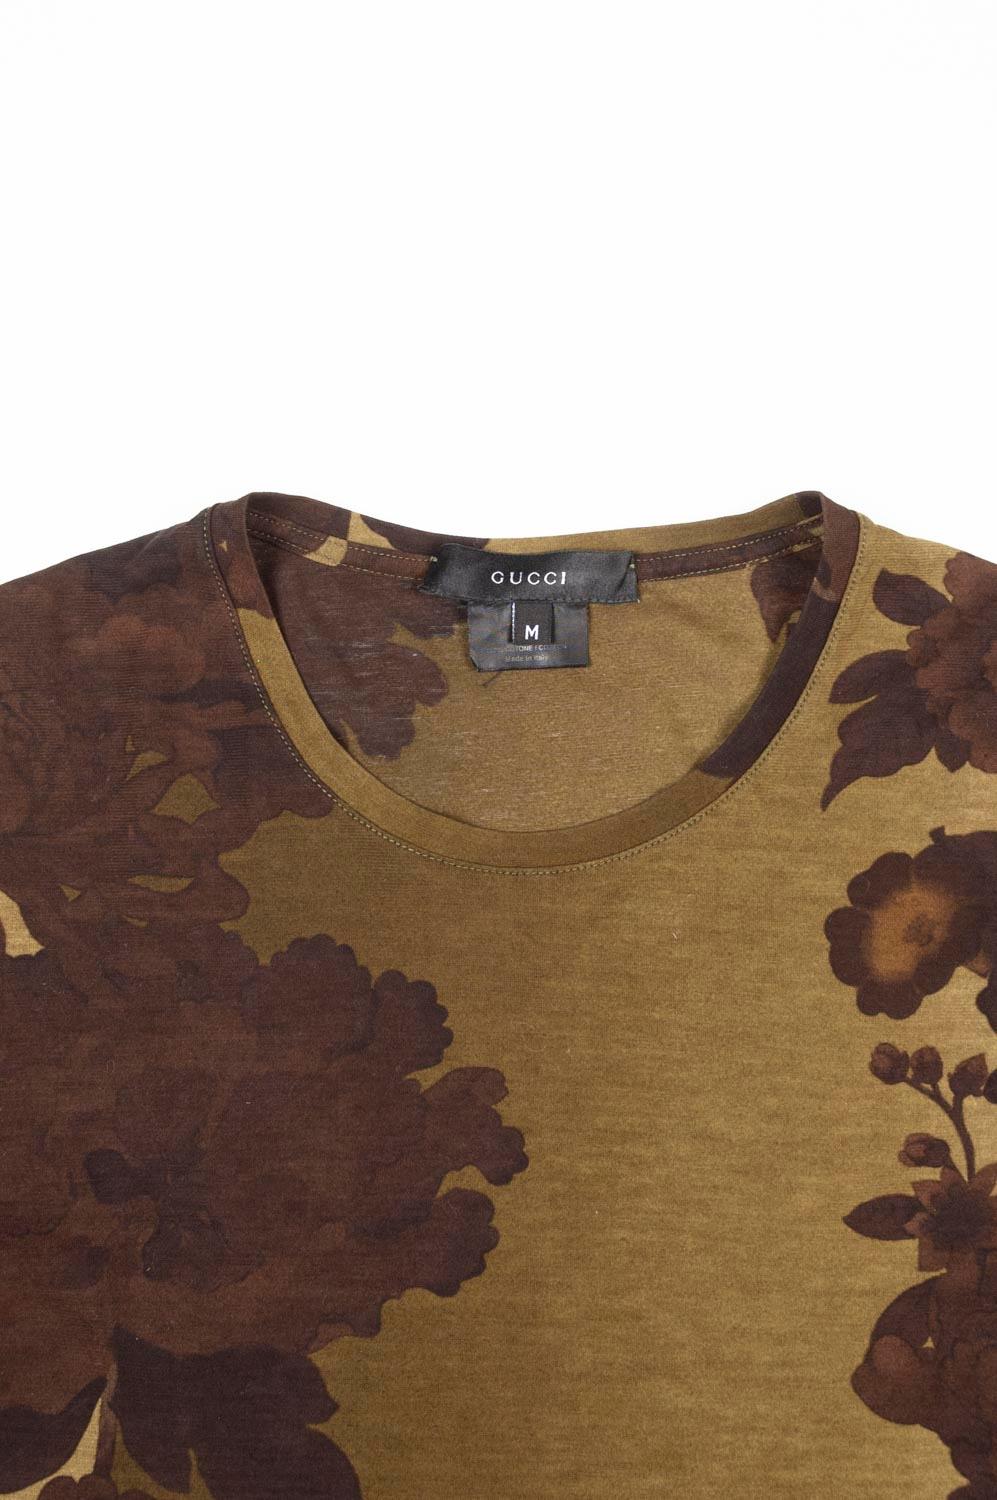 Item for sale is 100% genuine Gucci by Tom Ford Men T-Shirt, S498
Color: brown/sand
(An actual color may a bit vary due to individual computer screen interpretation)
Material: 100% cotton
Tag size: M runs cropped check measurements
This t shirt is